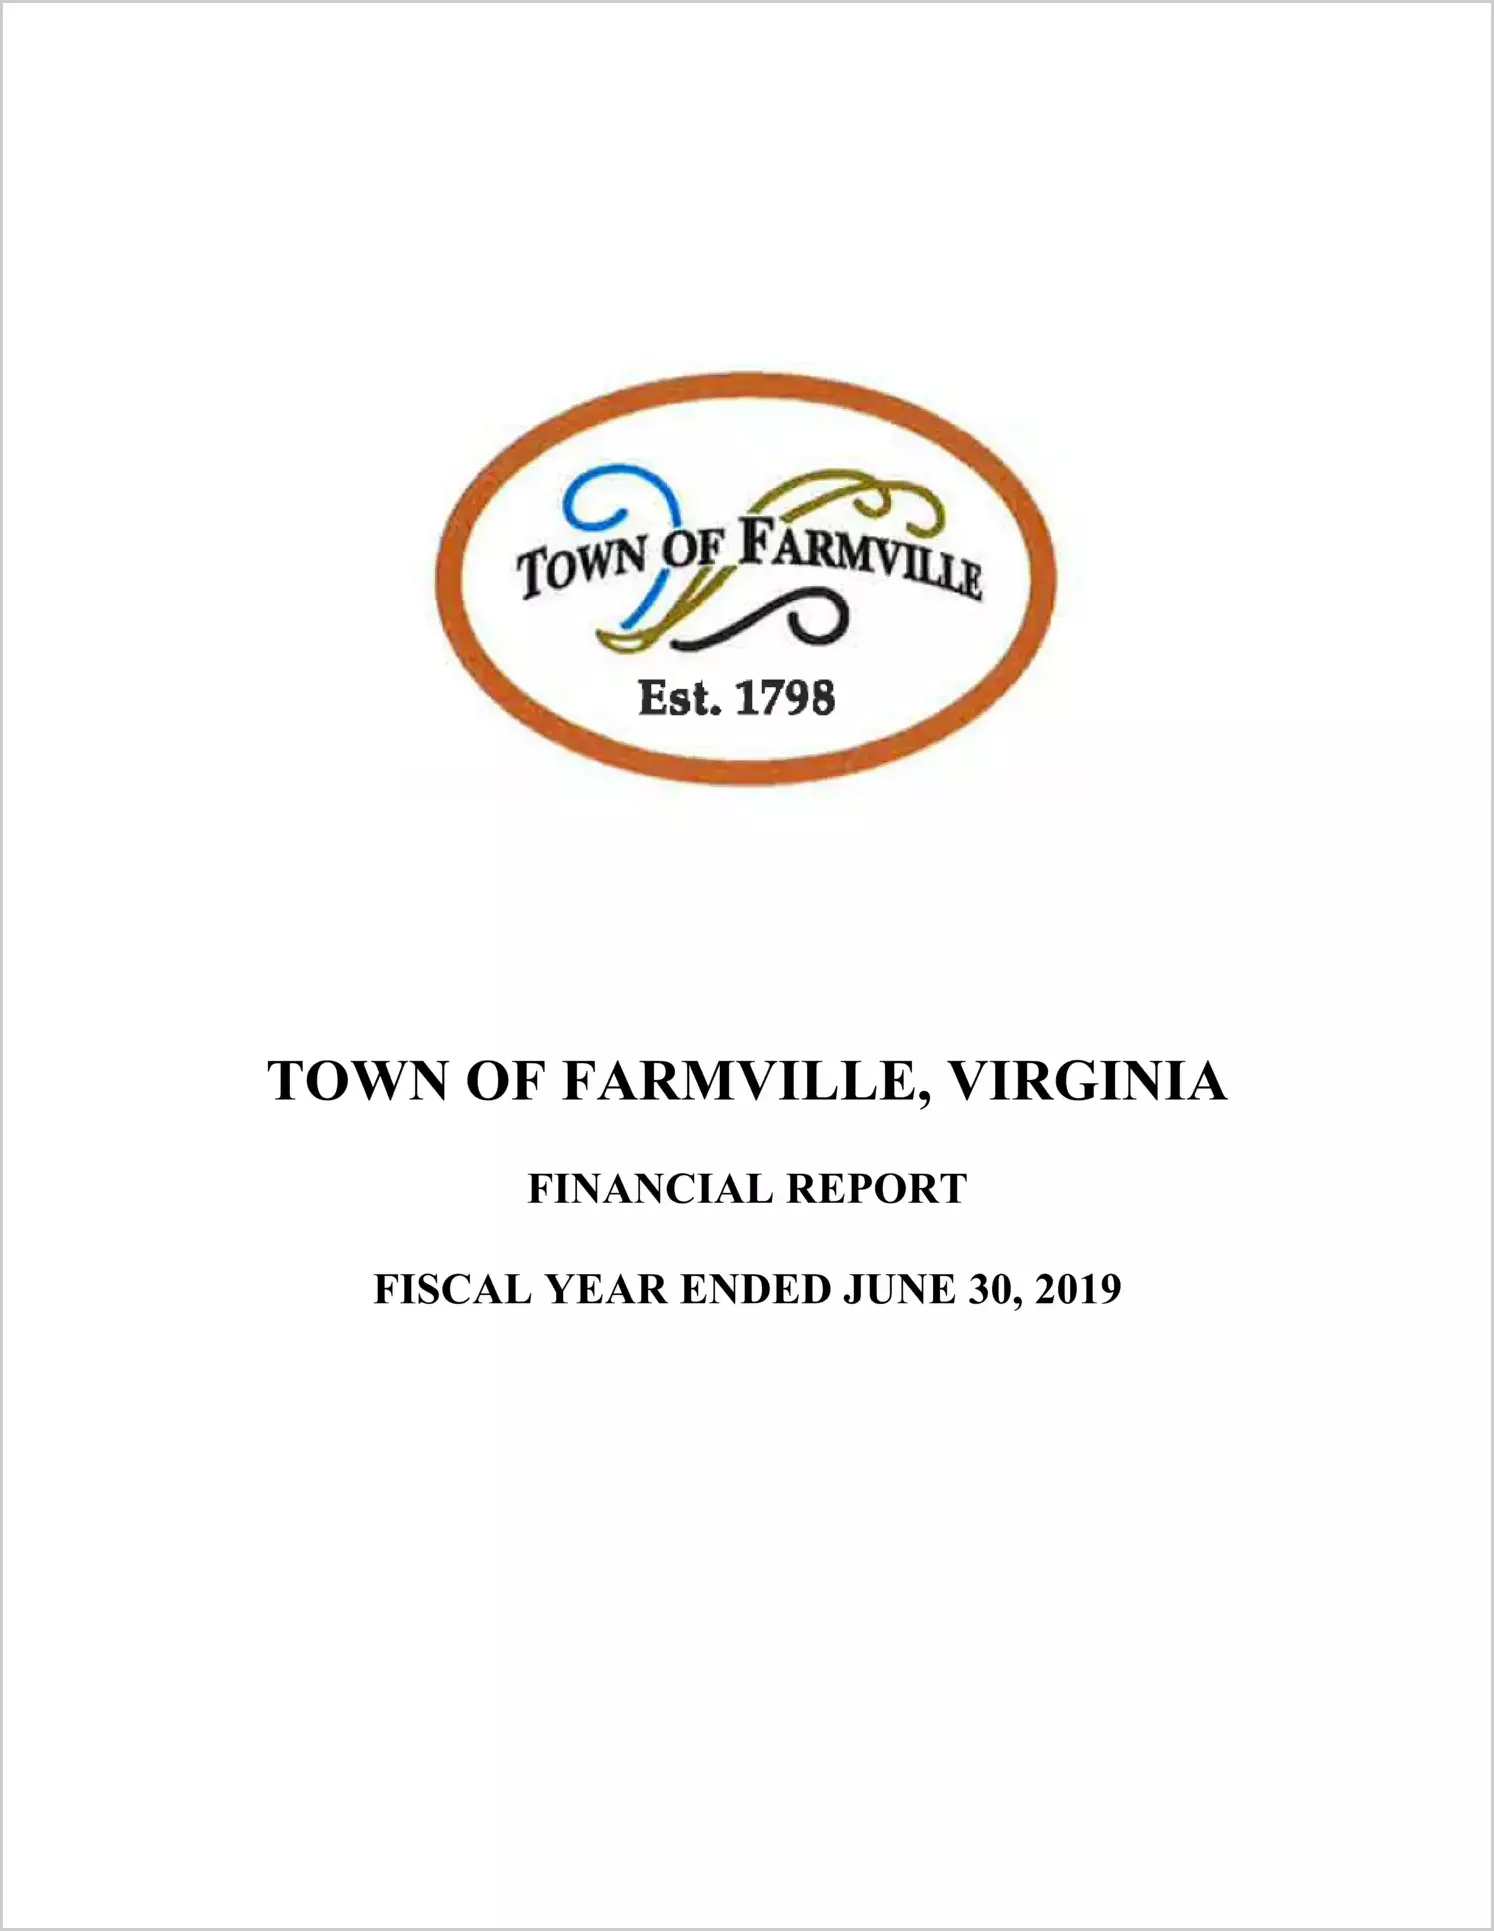 2019 Annual Financial Report for Town of Farmville